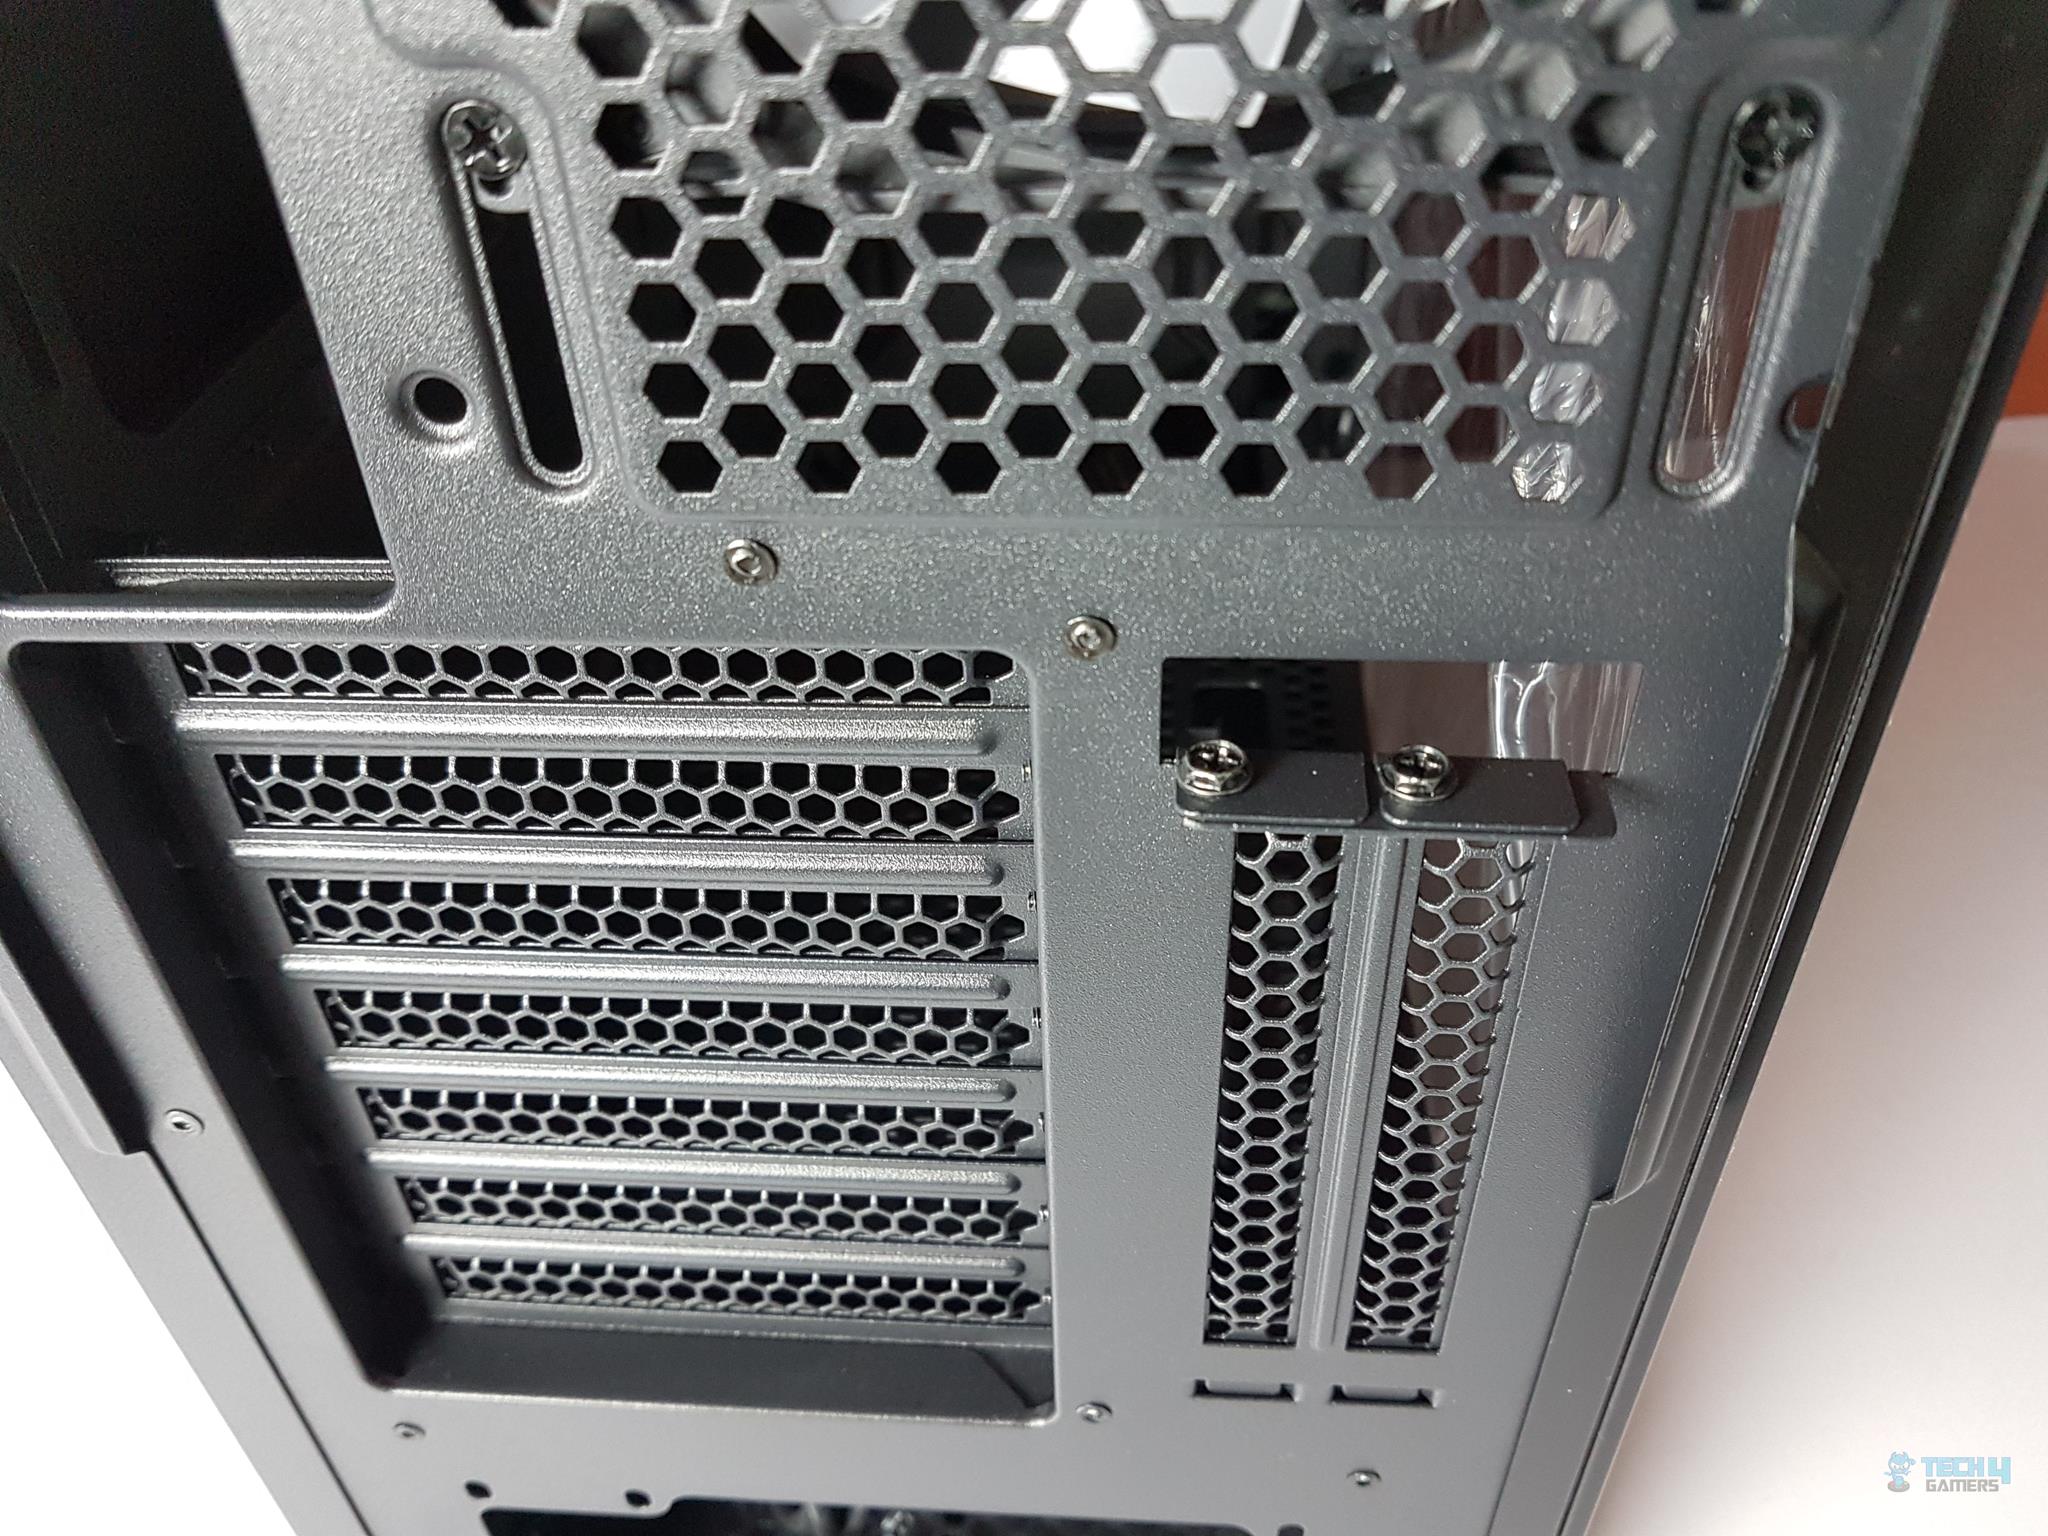 h550 case 2x vertical PCIe slot covers